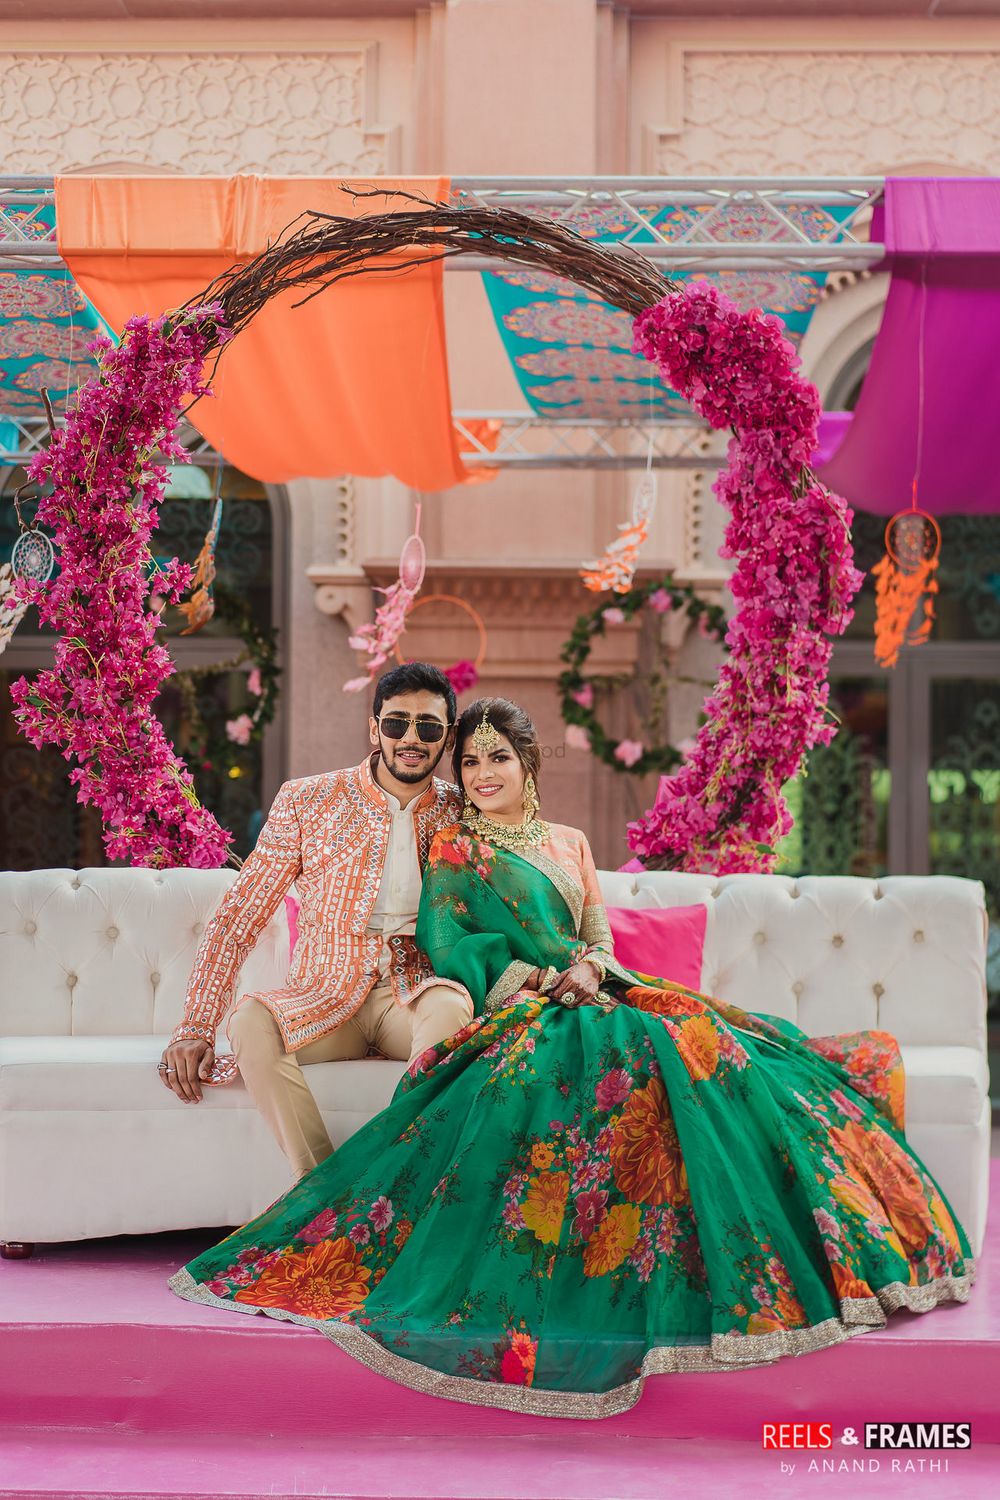 Photo Of A Bride And Groom In Colorful And Coordinated Outfits For Their Mehndi 1344